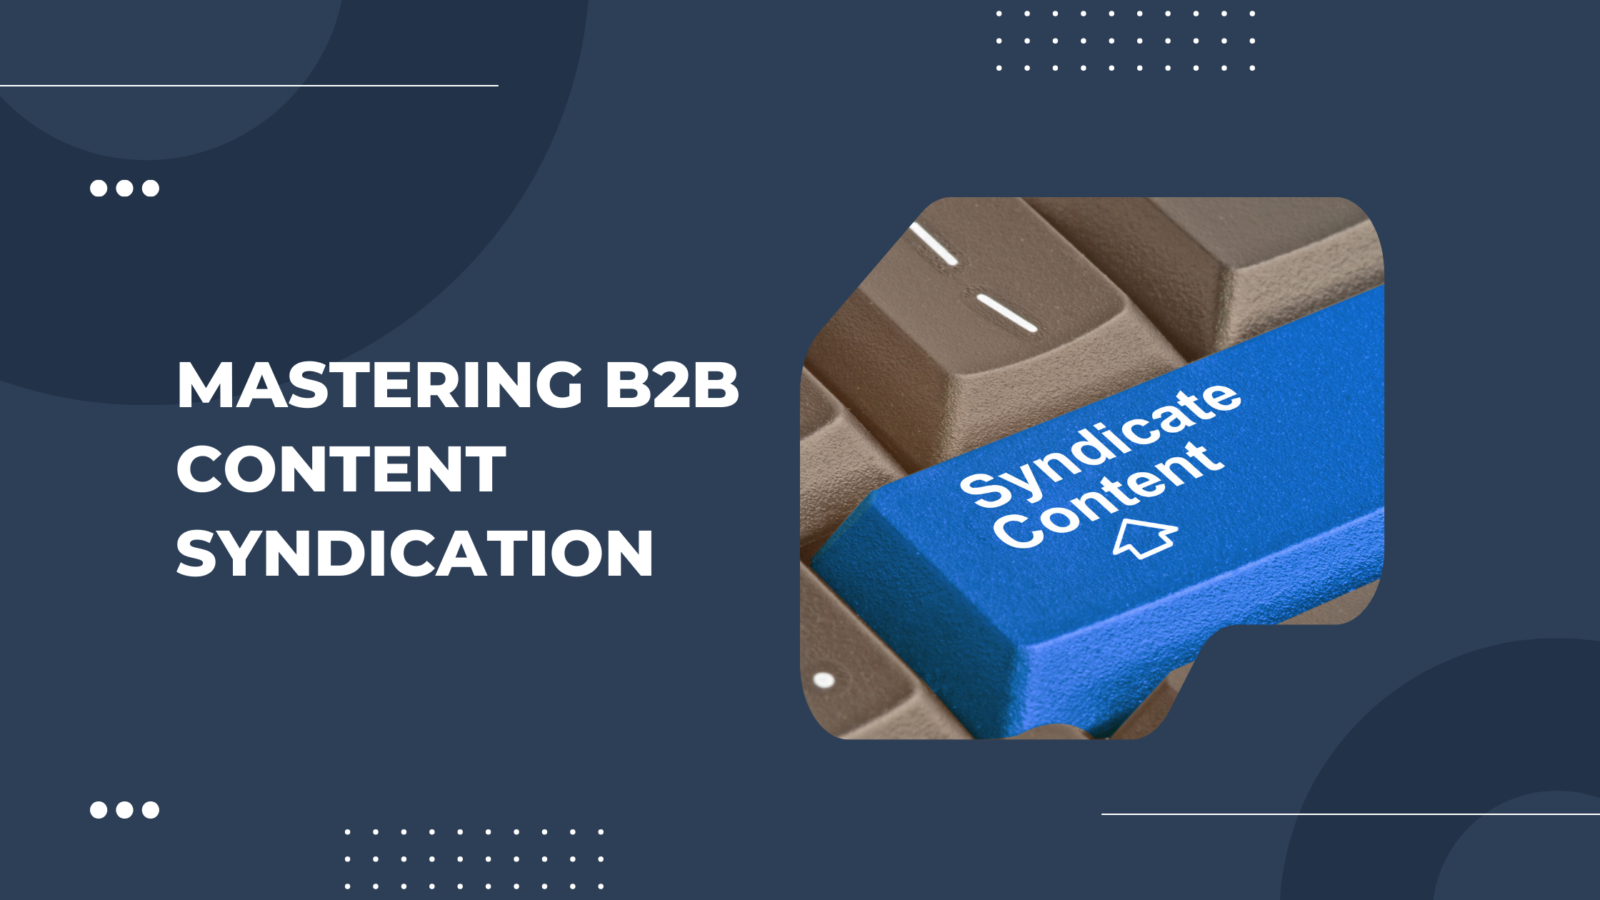 Acceligize B2B company blog posts on mastering B2B content syndication best practices.